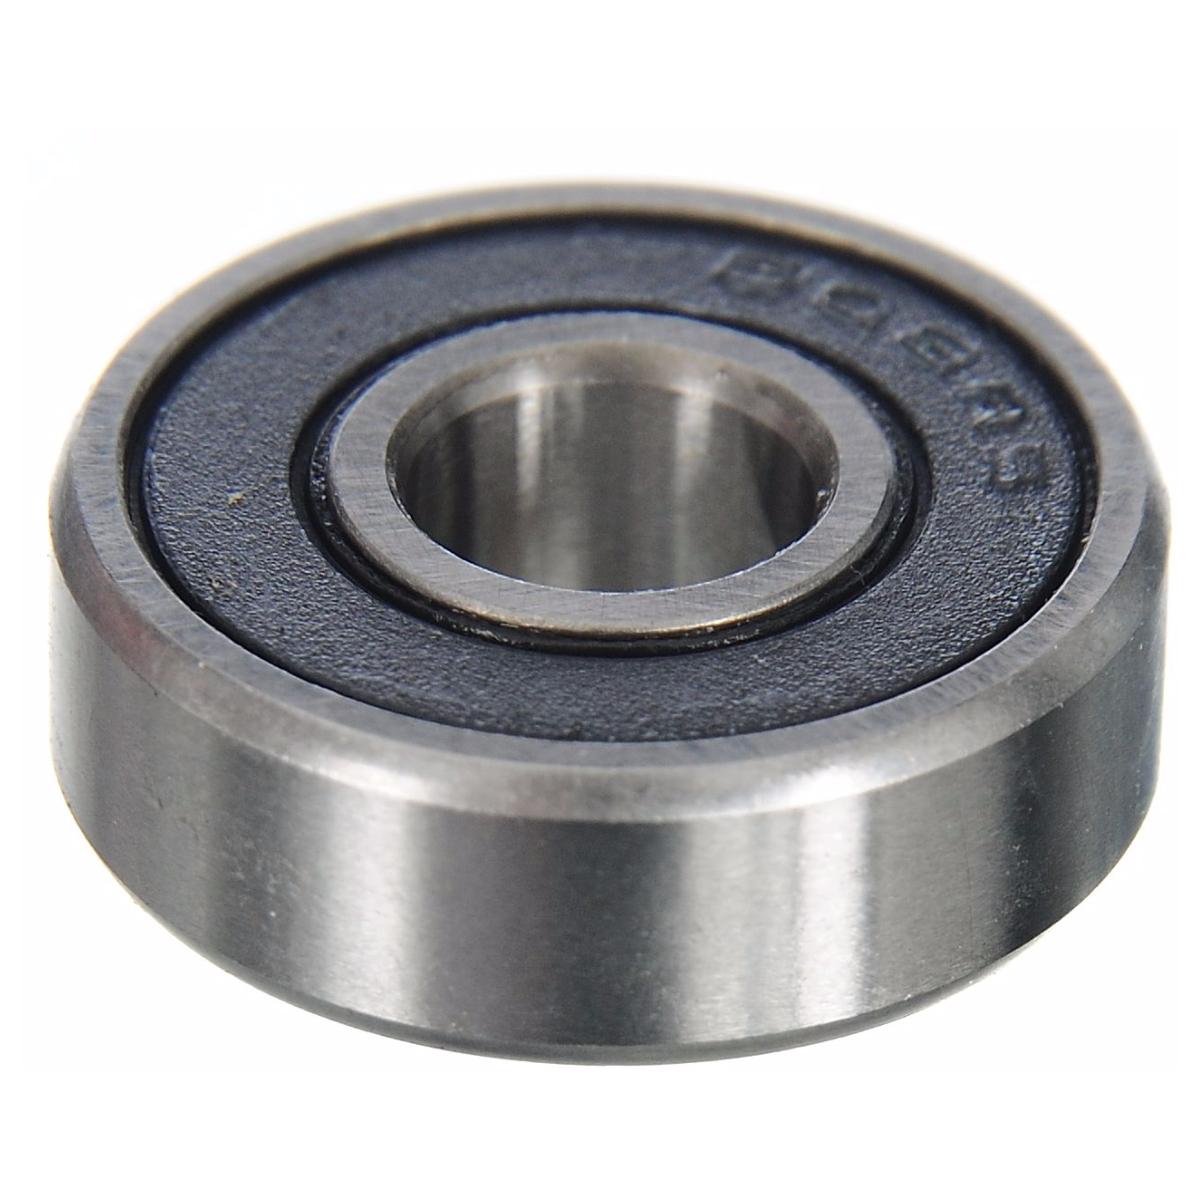 Brand-x Sealed Bearing (608 2rs)  Silver